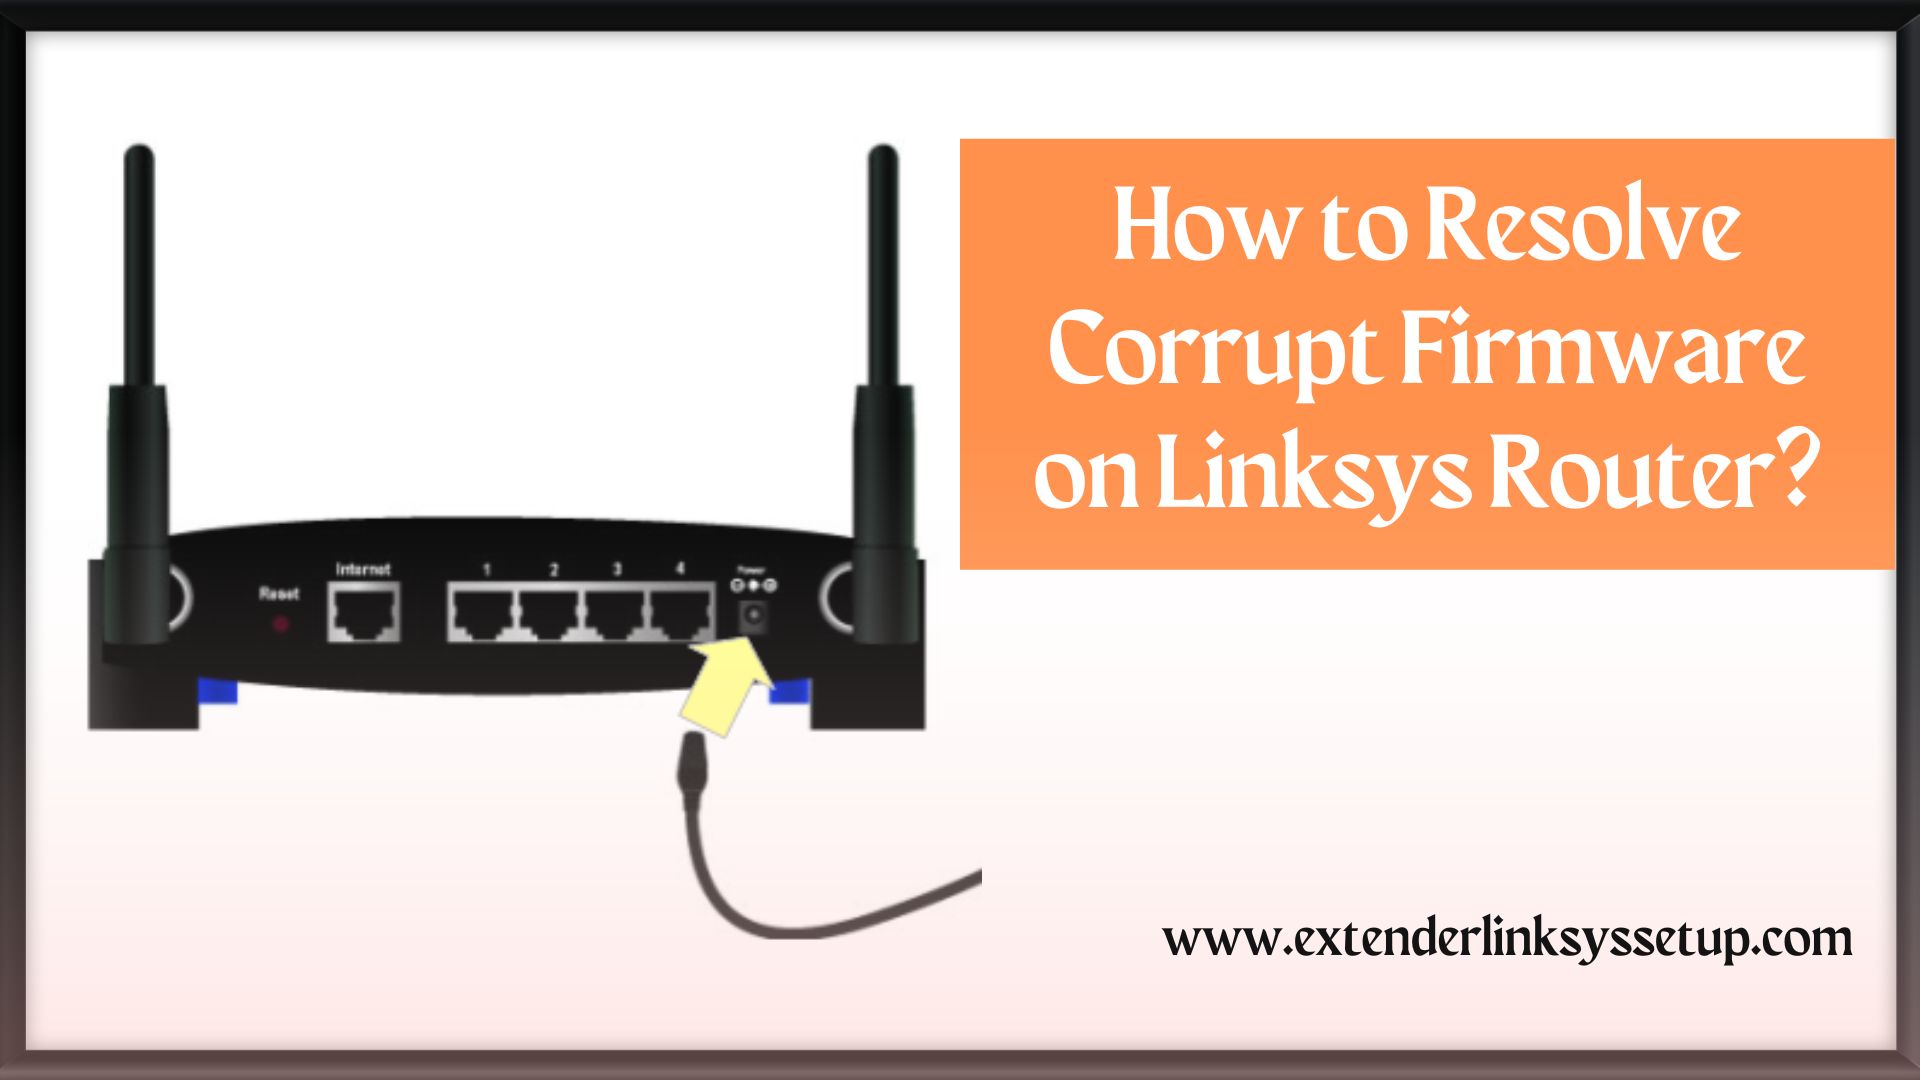 How to Resolve Corrupt Firmware on Linksys Router